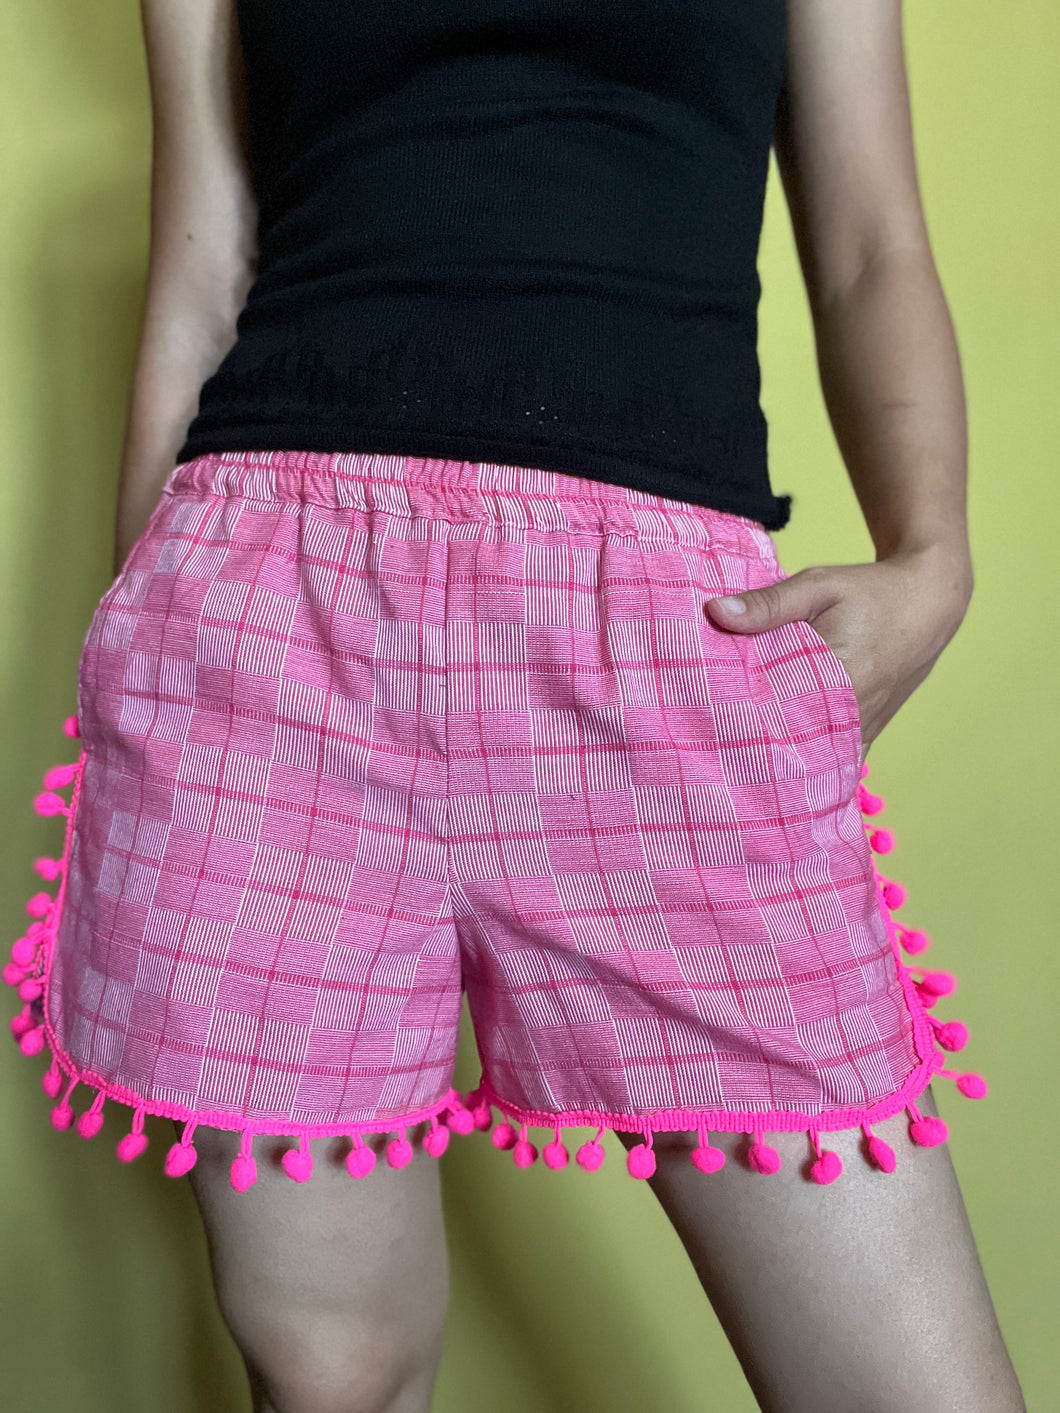 Mademoiselle shorts in pink